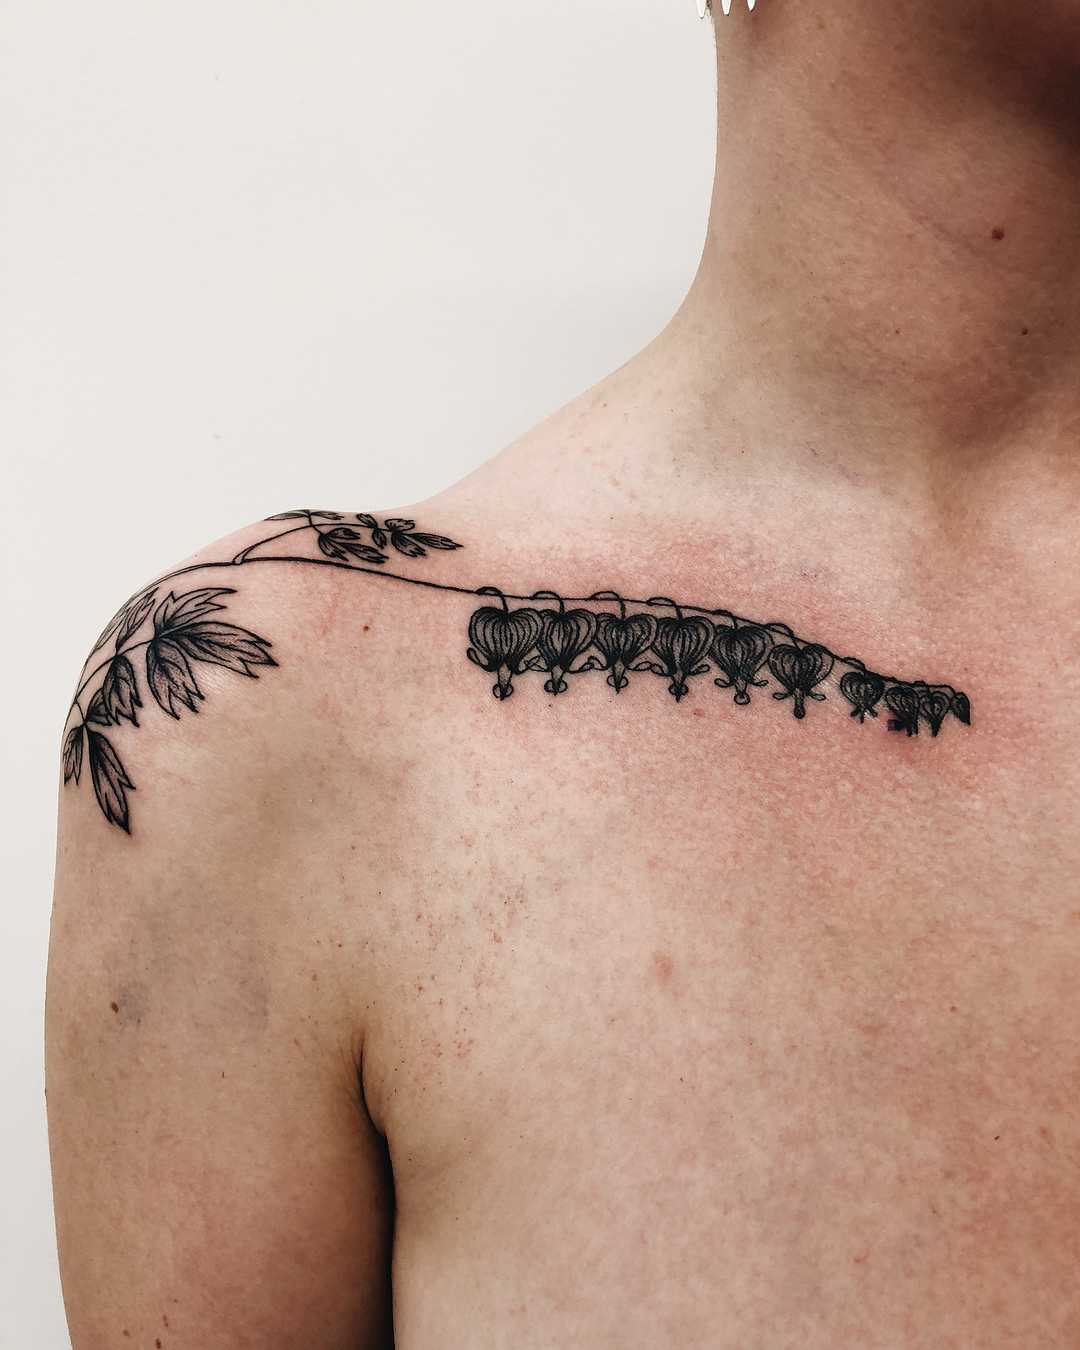 Flower tattoo on the shoulder and clavicle bone